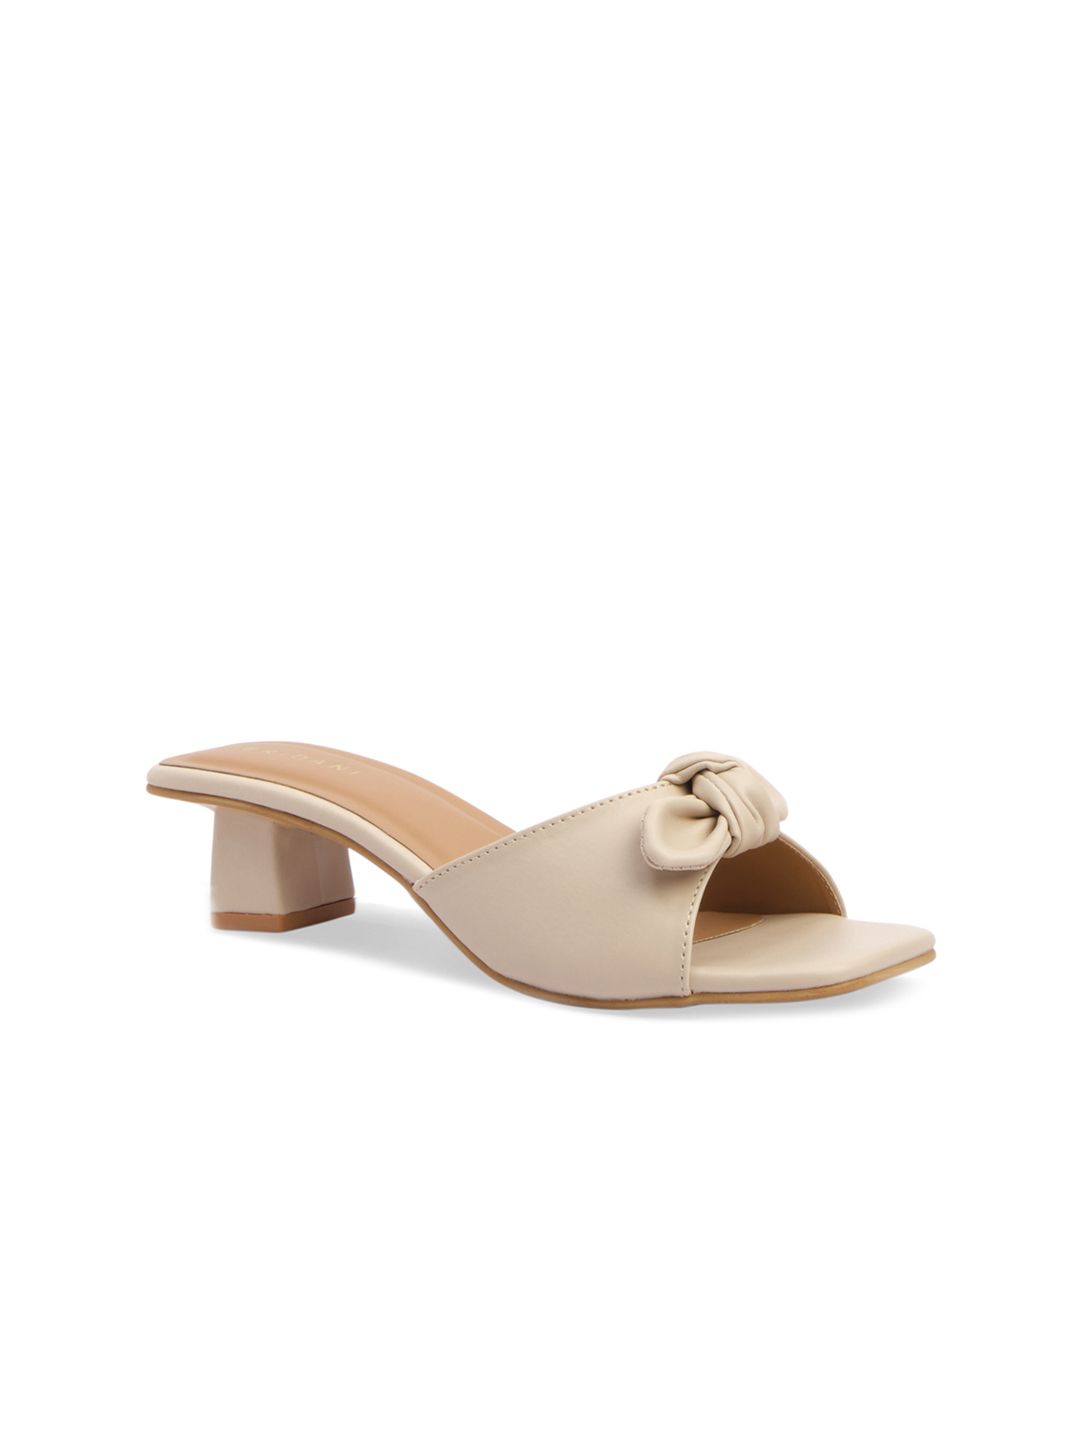 ERIDANI Beige Block Sandals with Bows Price in India